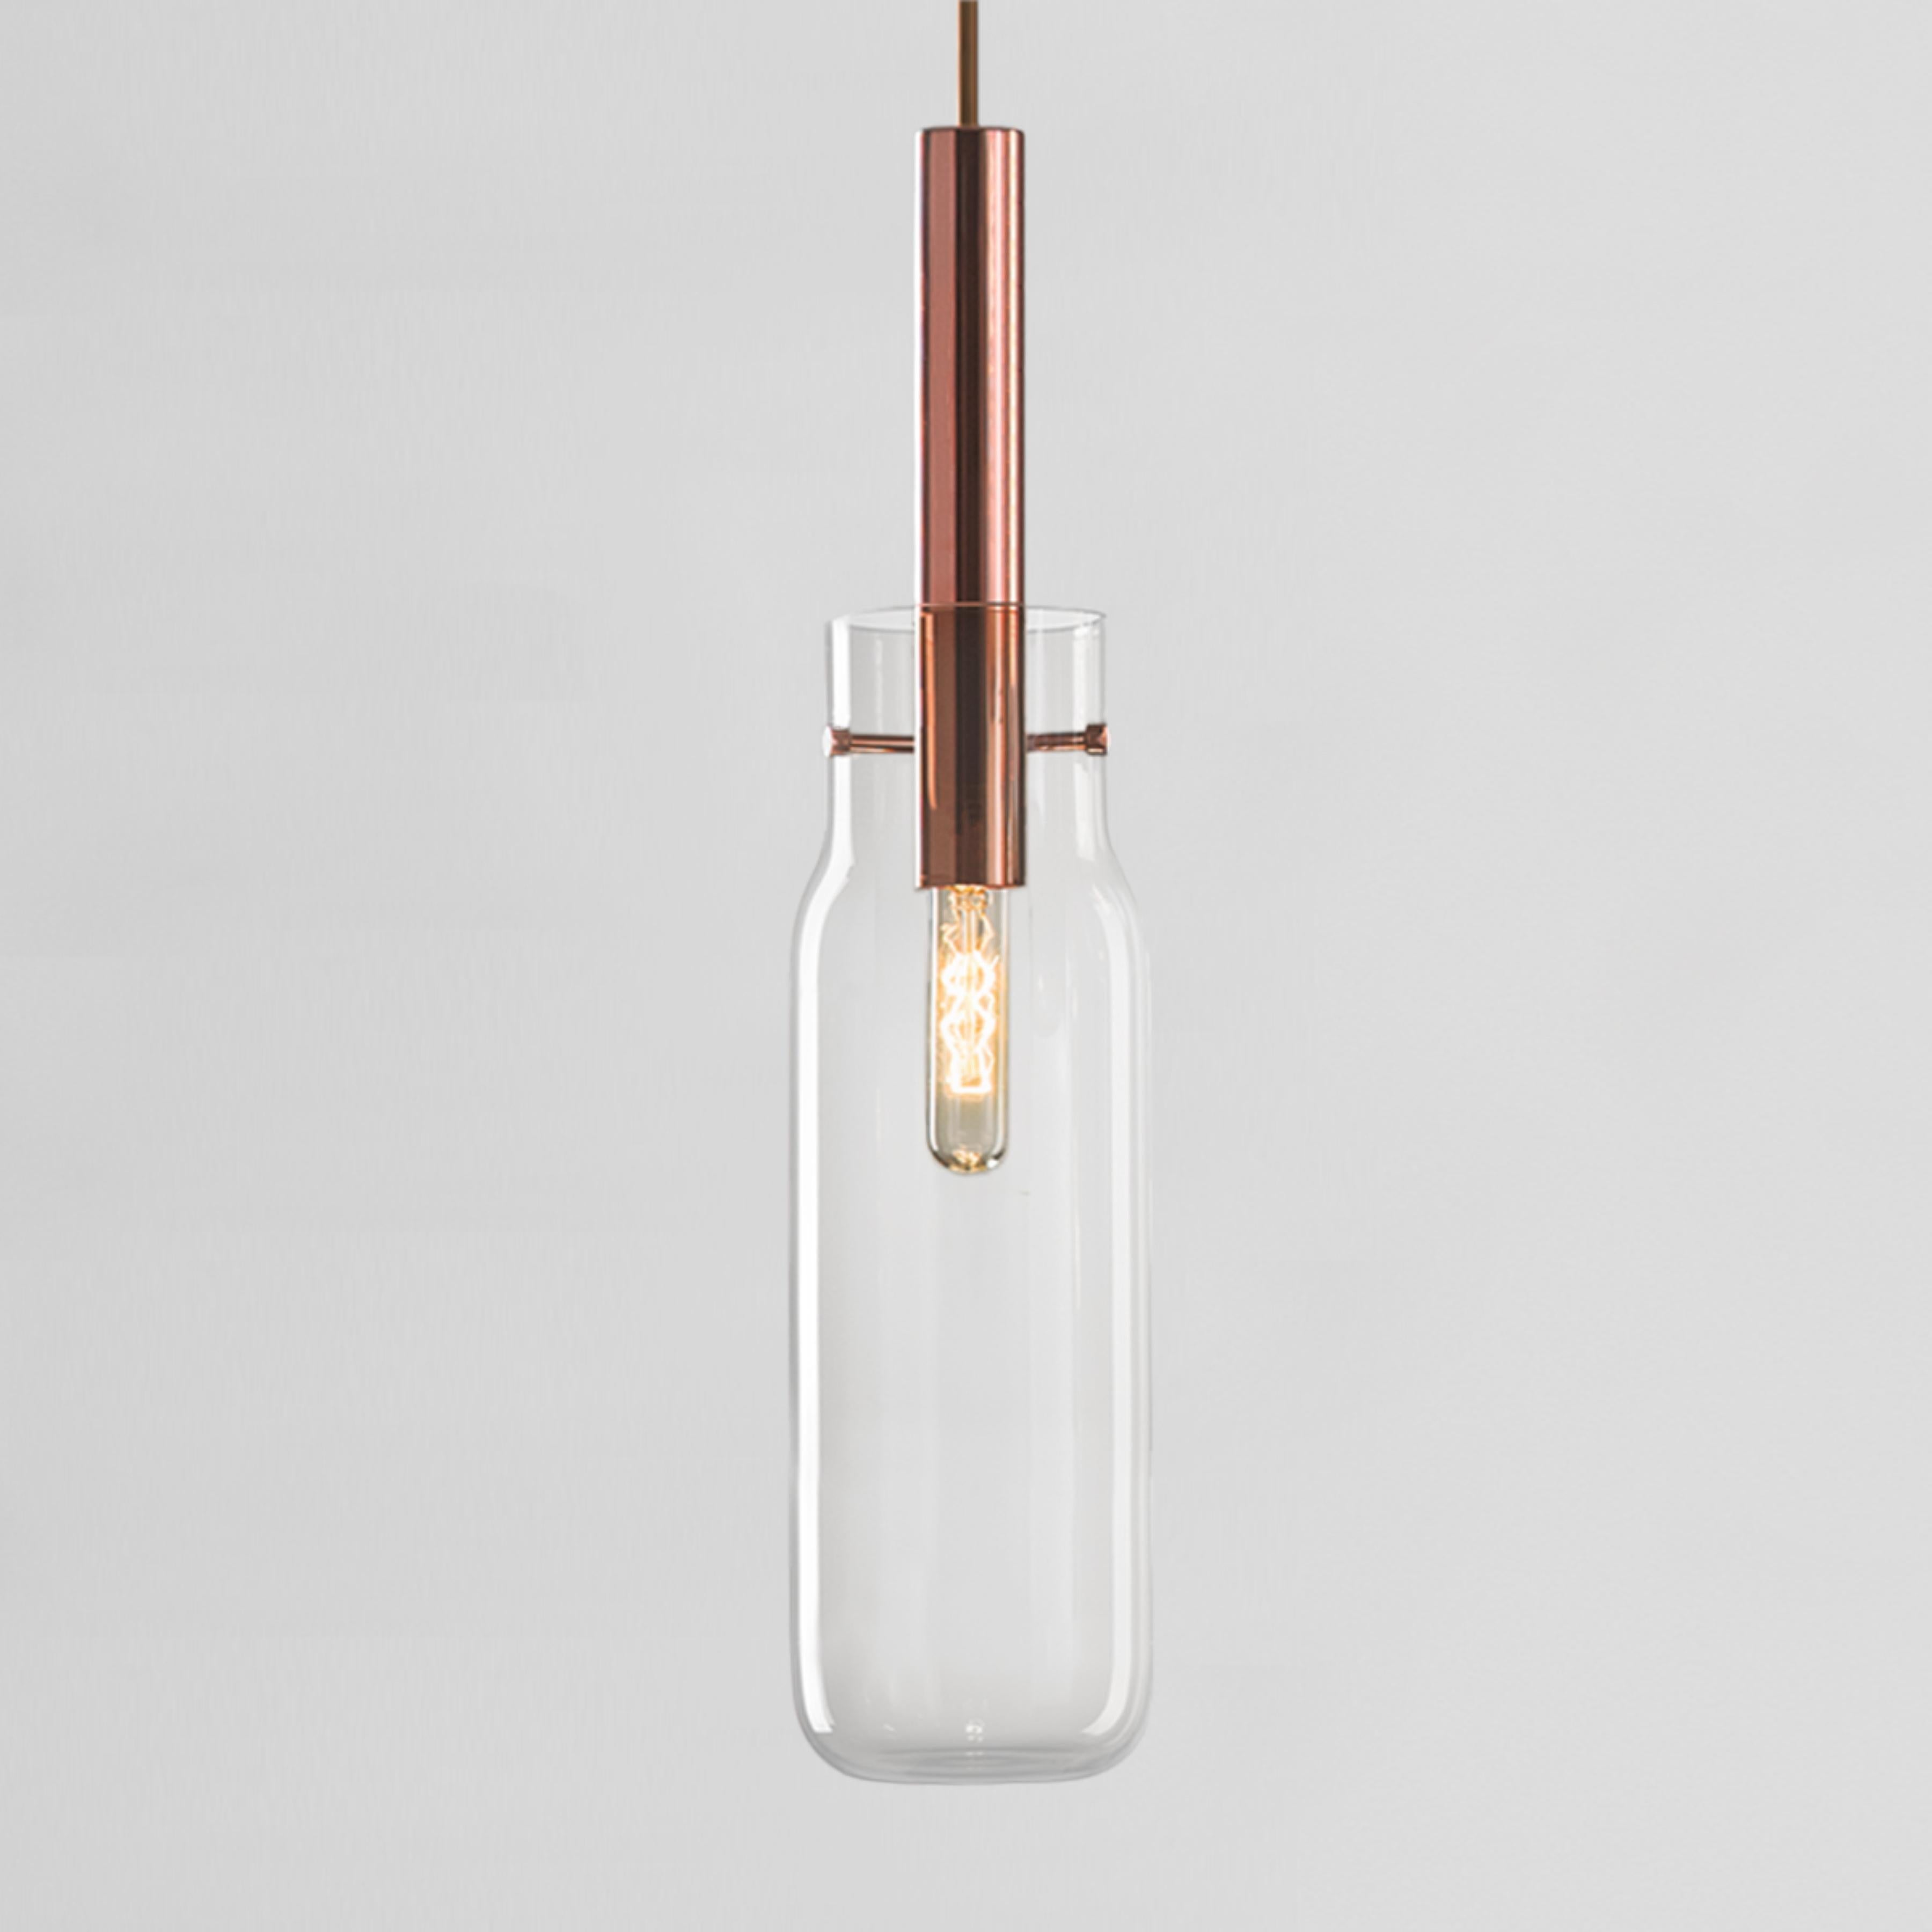 Tall Bandaska pendant light by Dechem Studio
Dimensions: D 9 x H 180 cm.
Materials: brass, glass.
Also available: different colours and sizes available.

Hand-blown into beech wood moulds, Bandaska Lights is based on the highly popular Bandaska